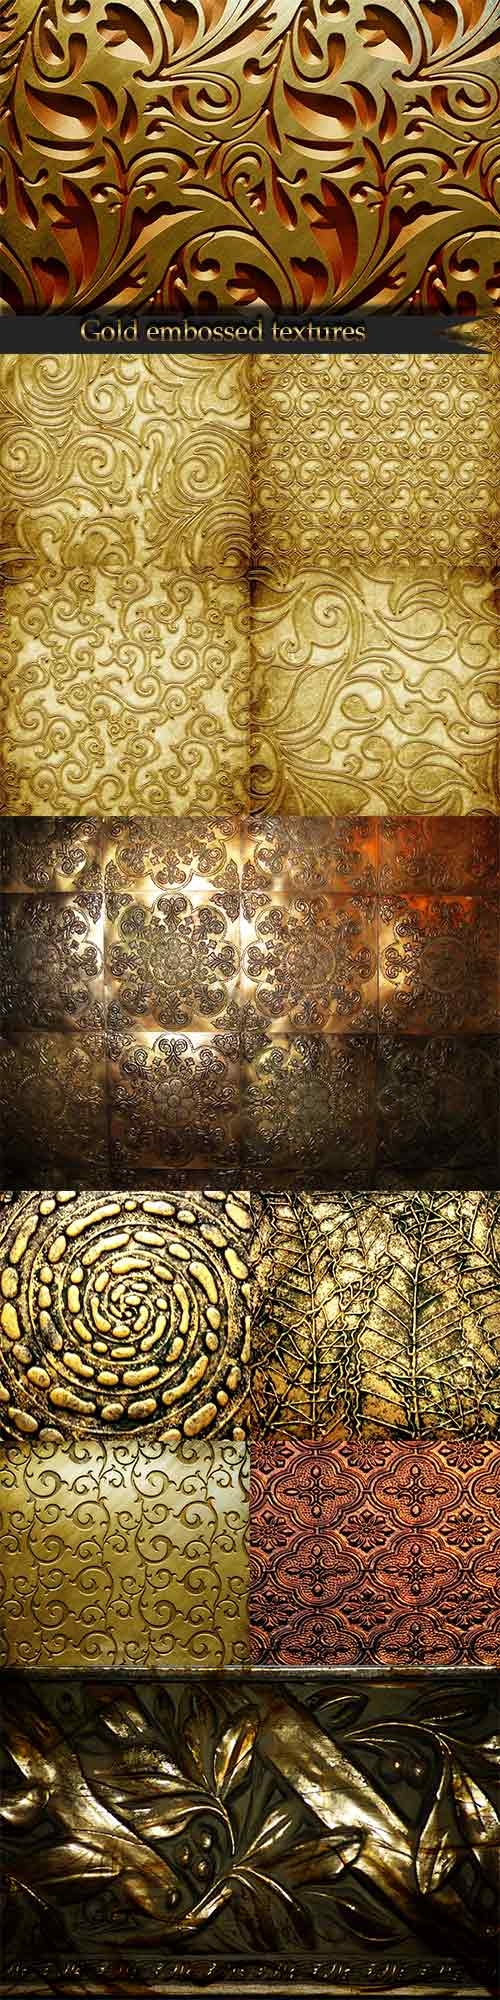 Stunning gold embossed textures